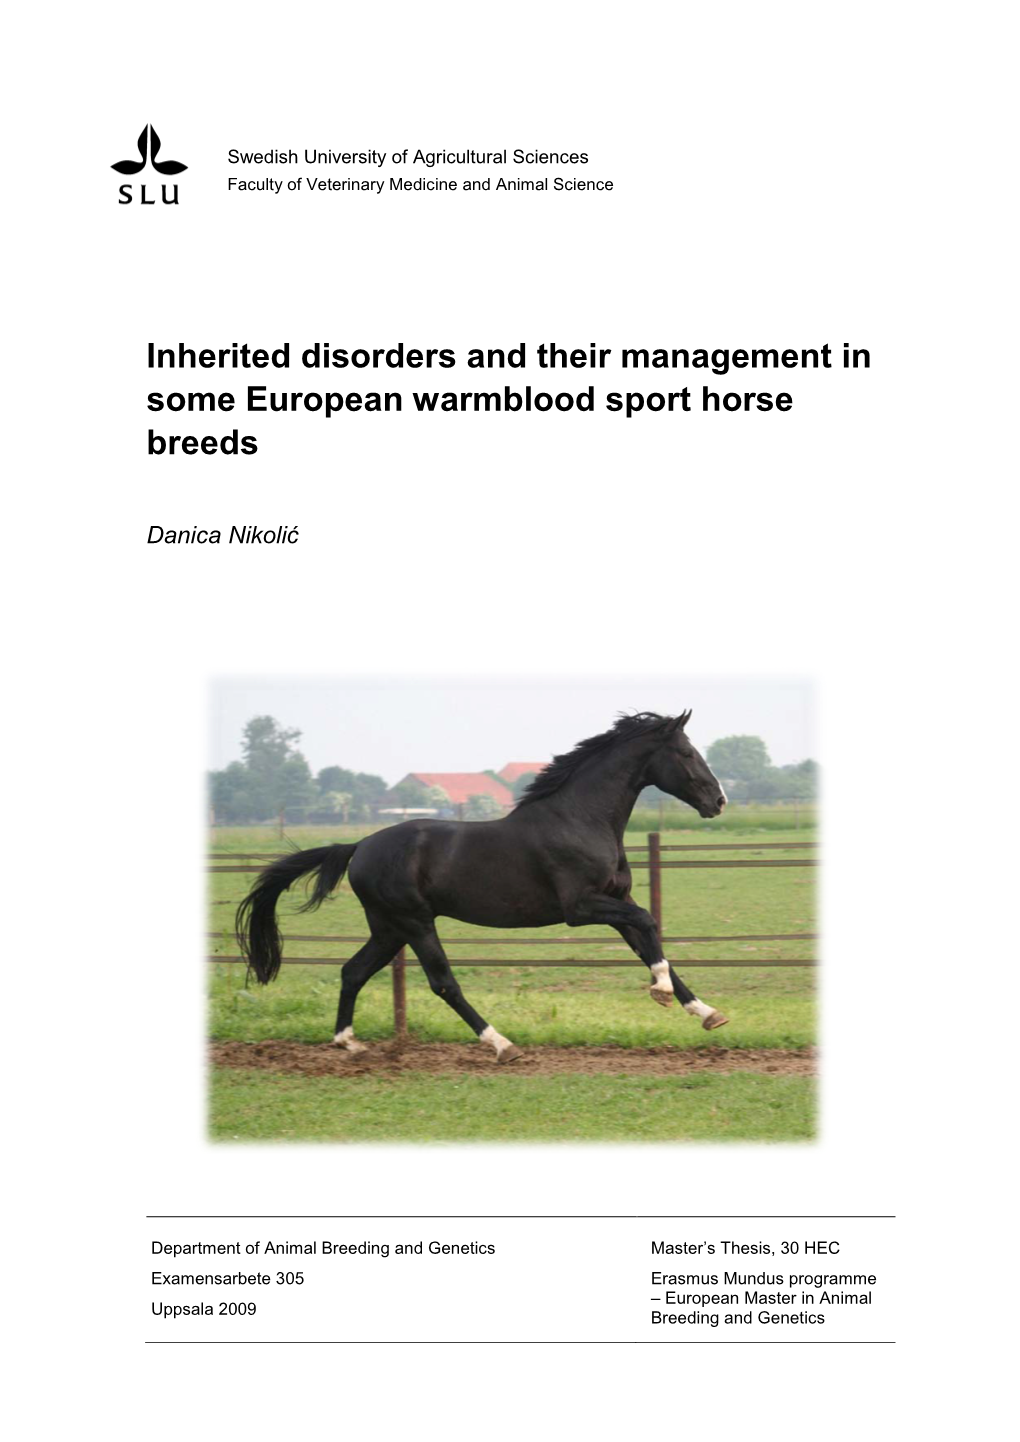 Inherited Disorders and Their Management in Some European Warmblood Sport Horse Breeds